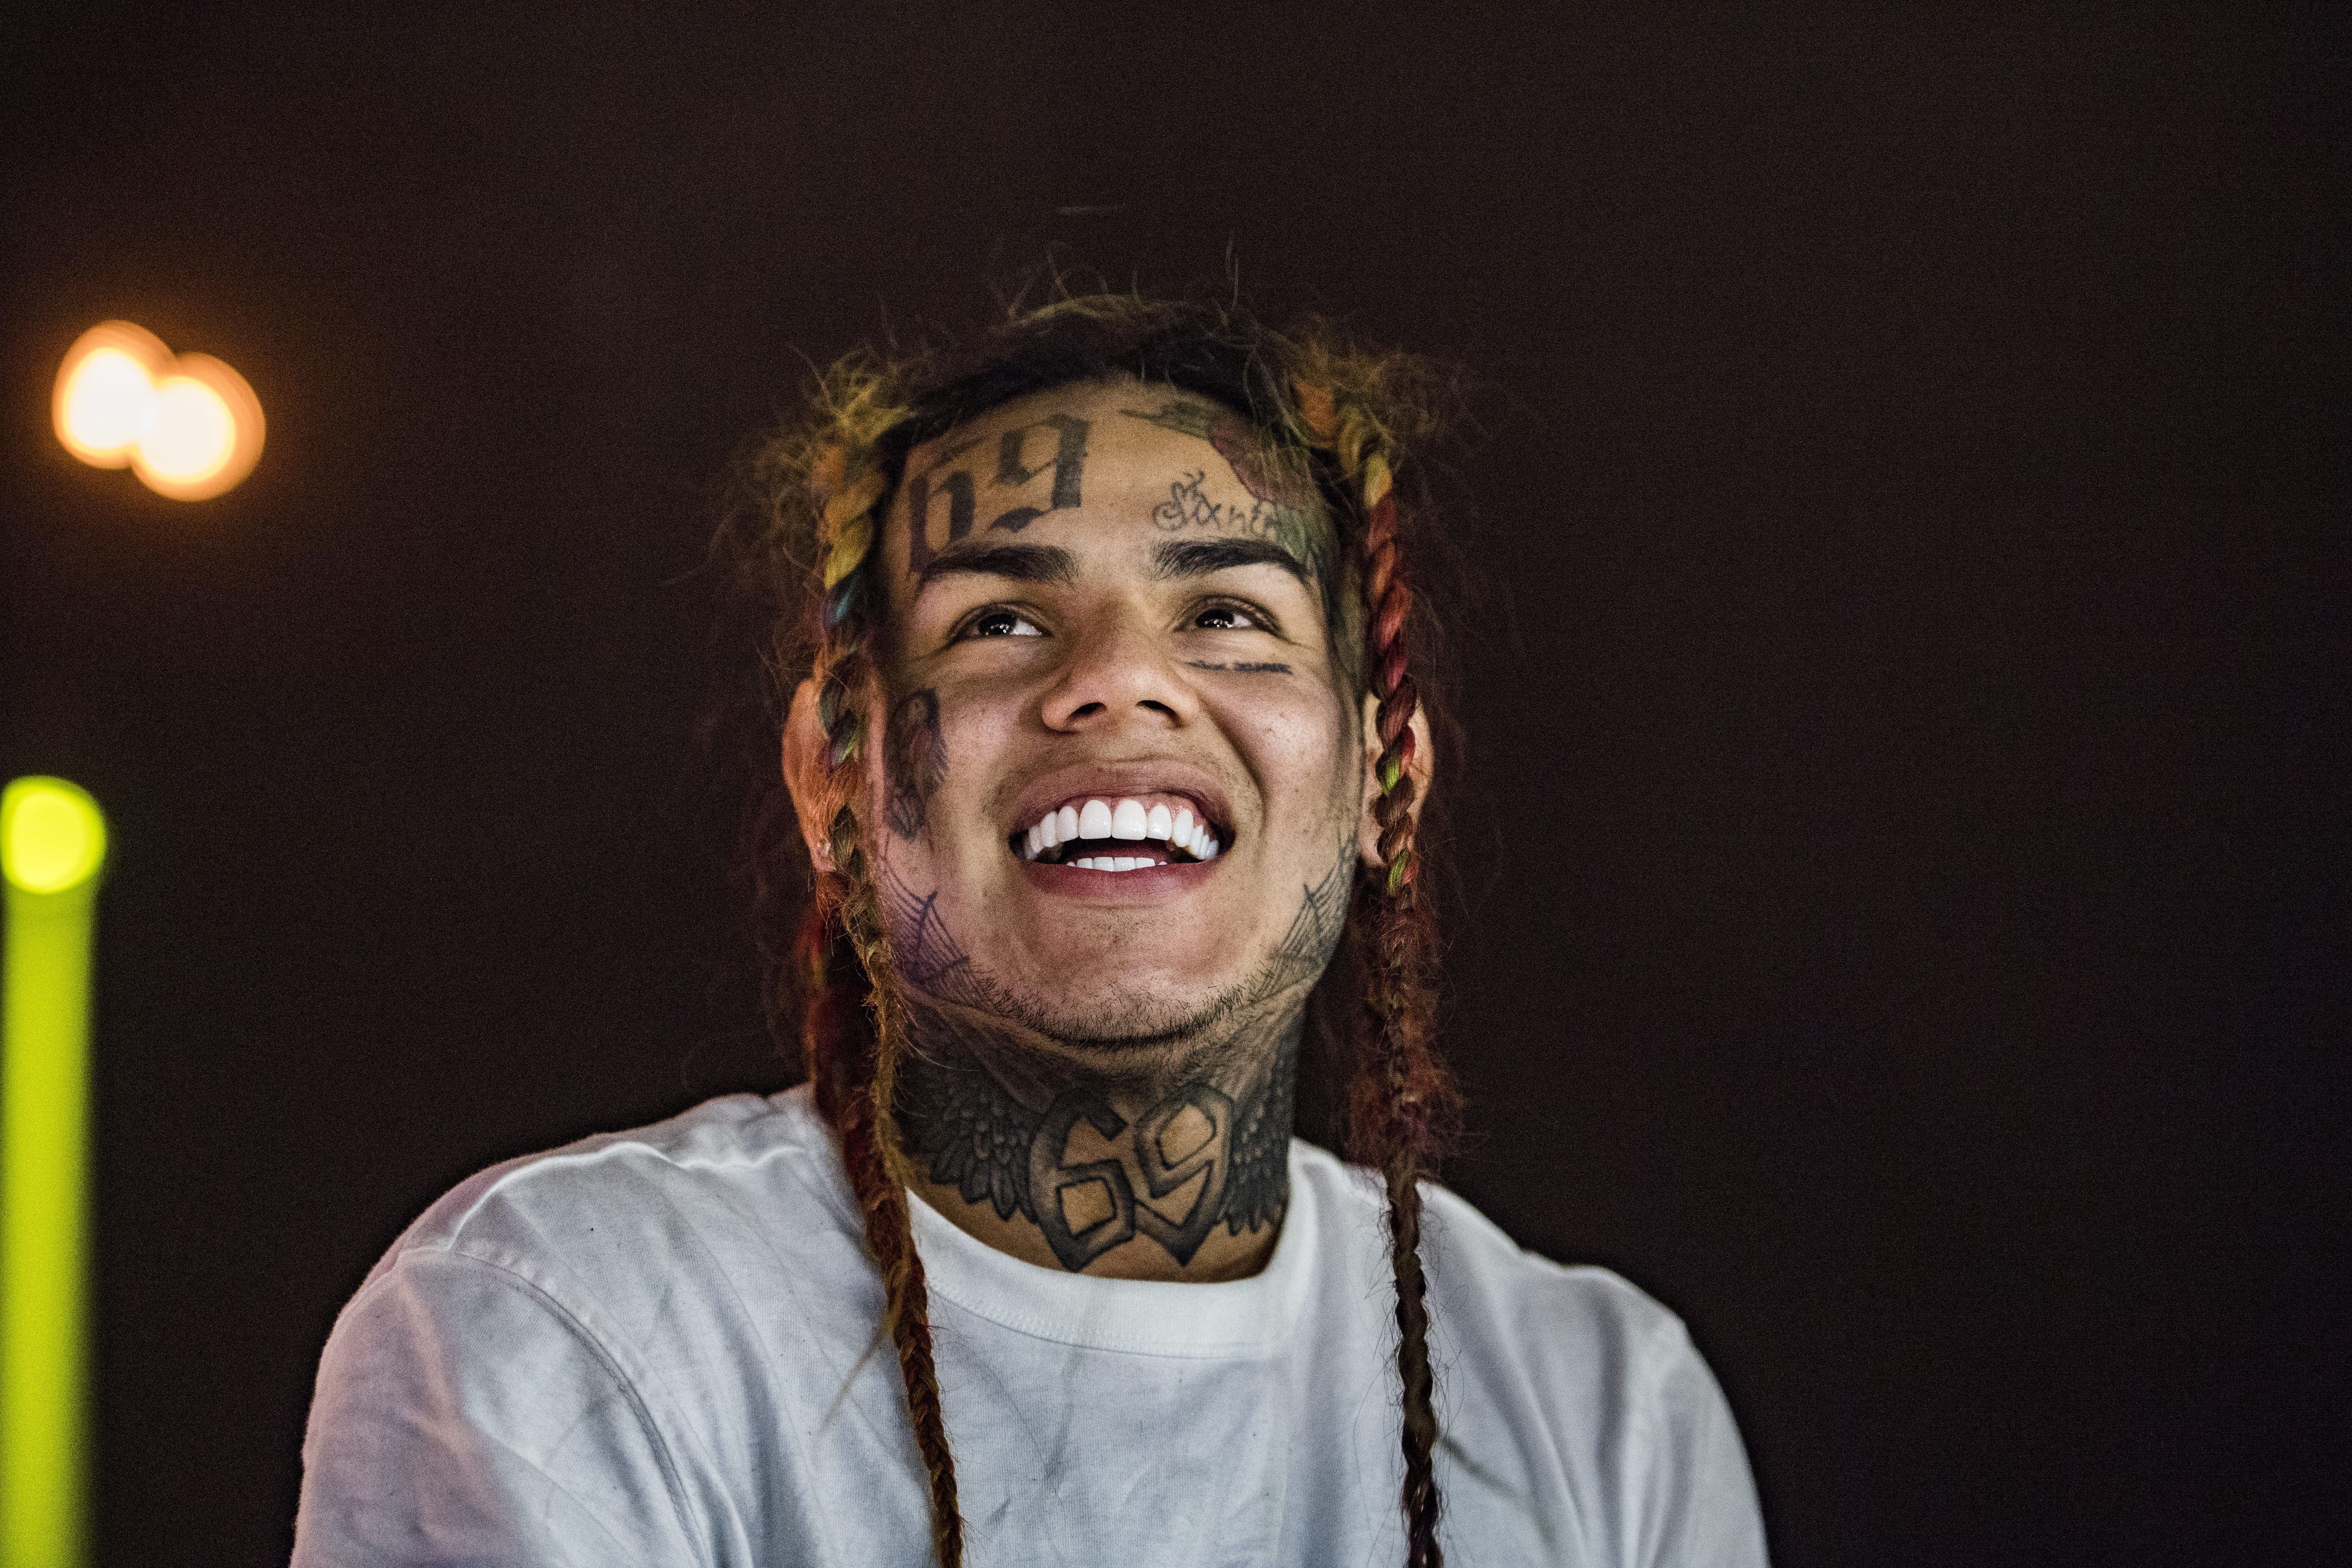 Tekashi 6ix9ine sets Instagram Live record after dropping new song - Wonderwall.com